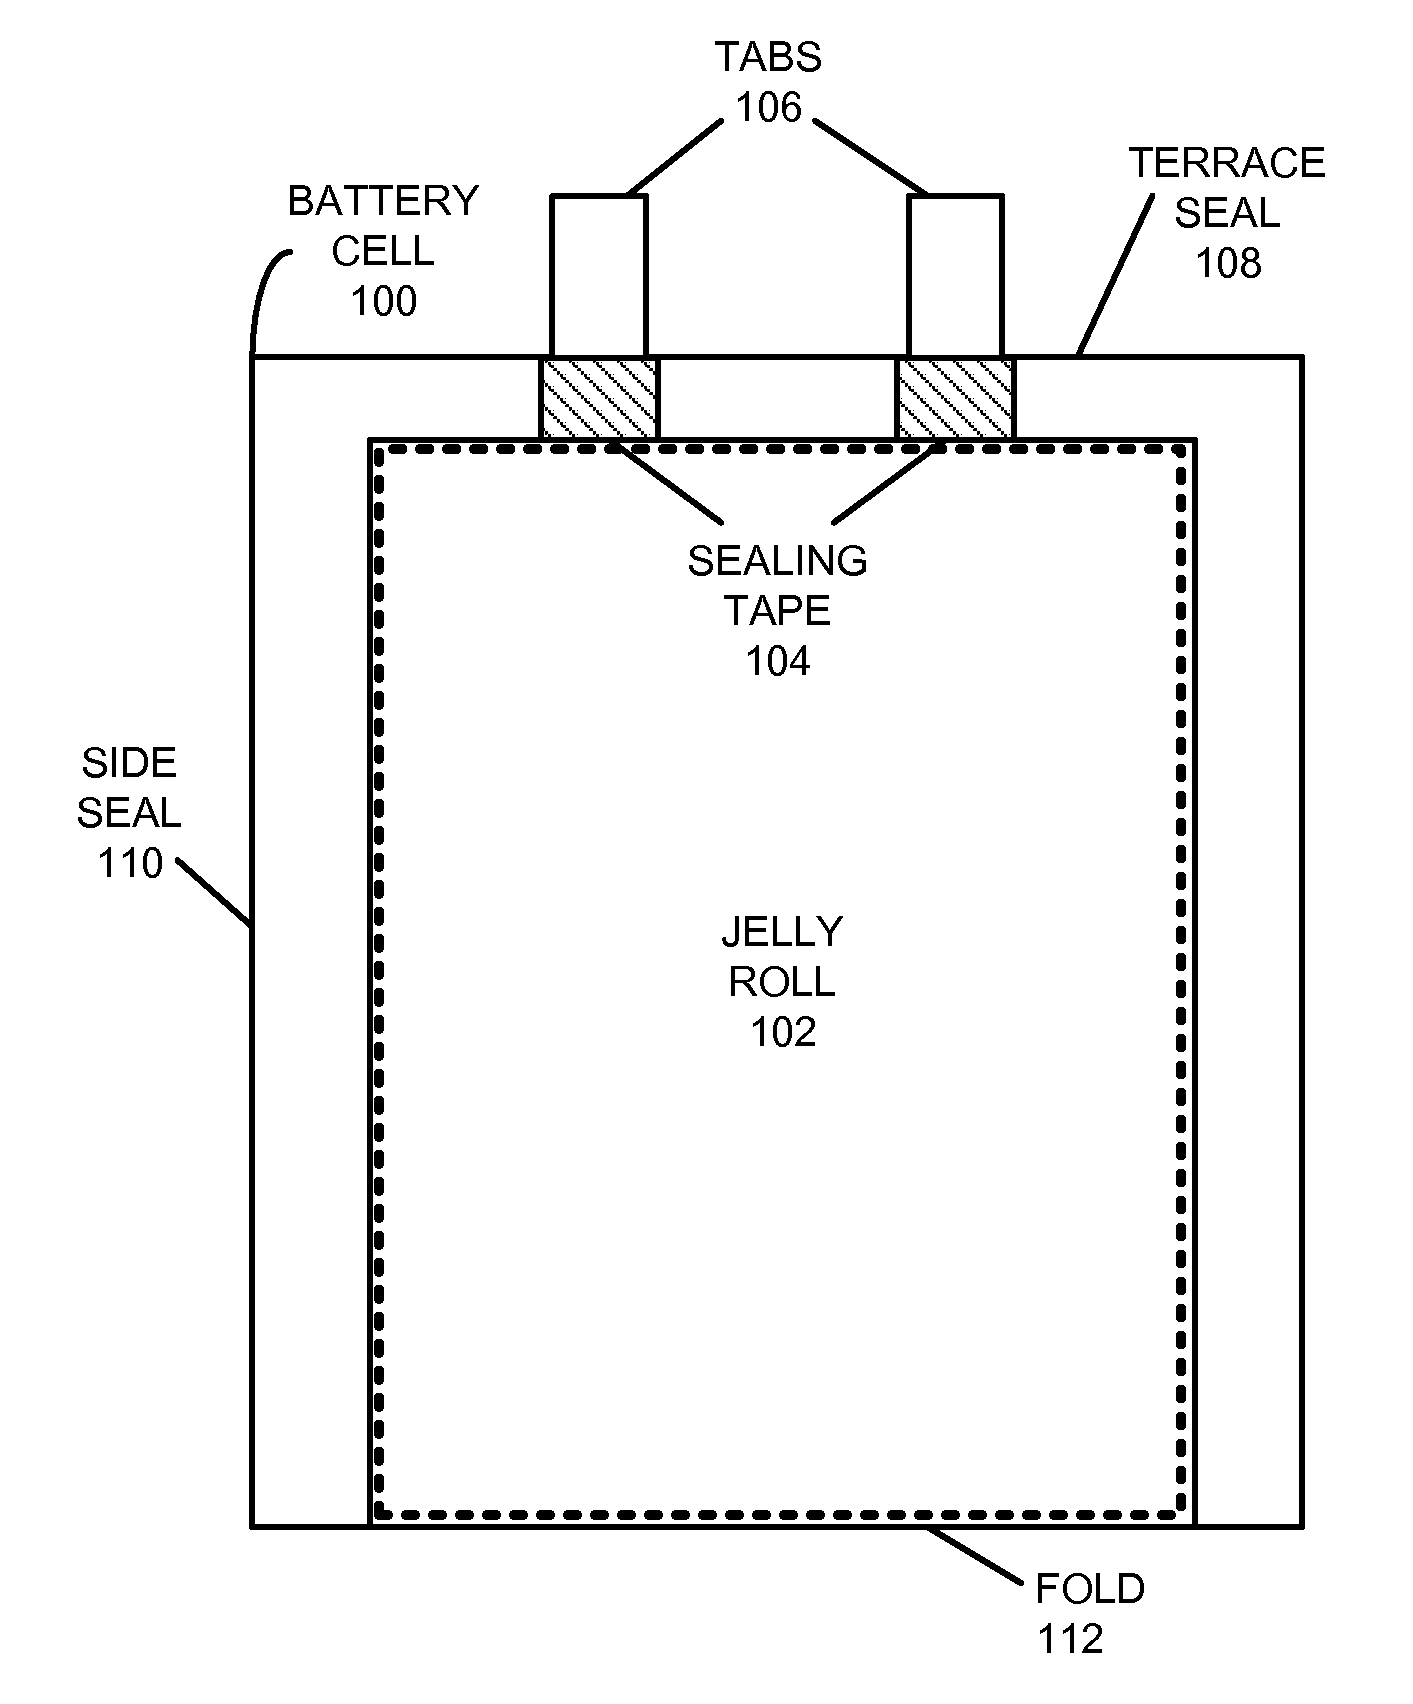 Curved battery cells for portable electronic devices